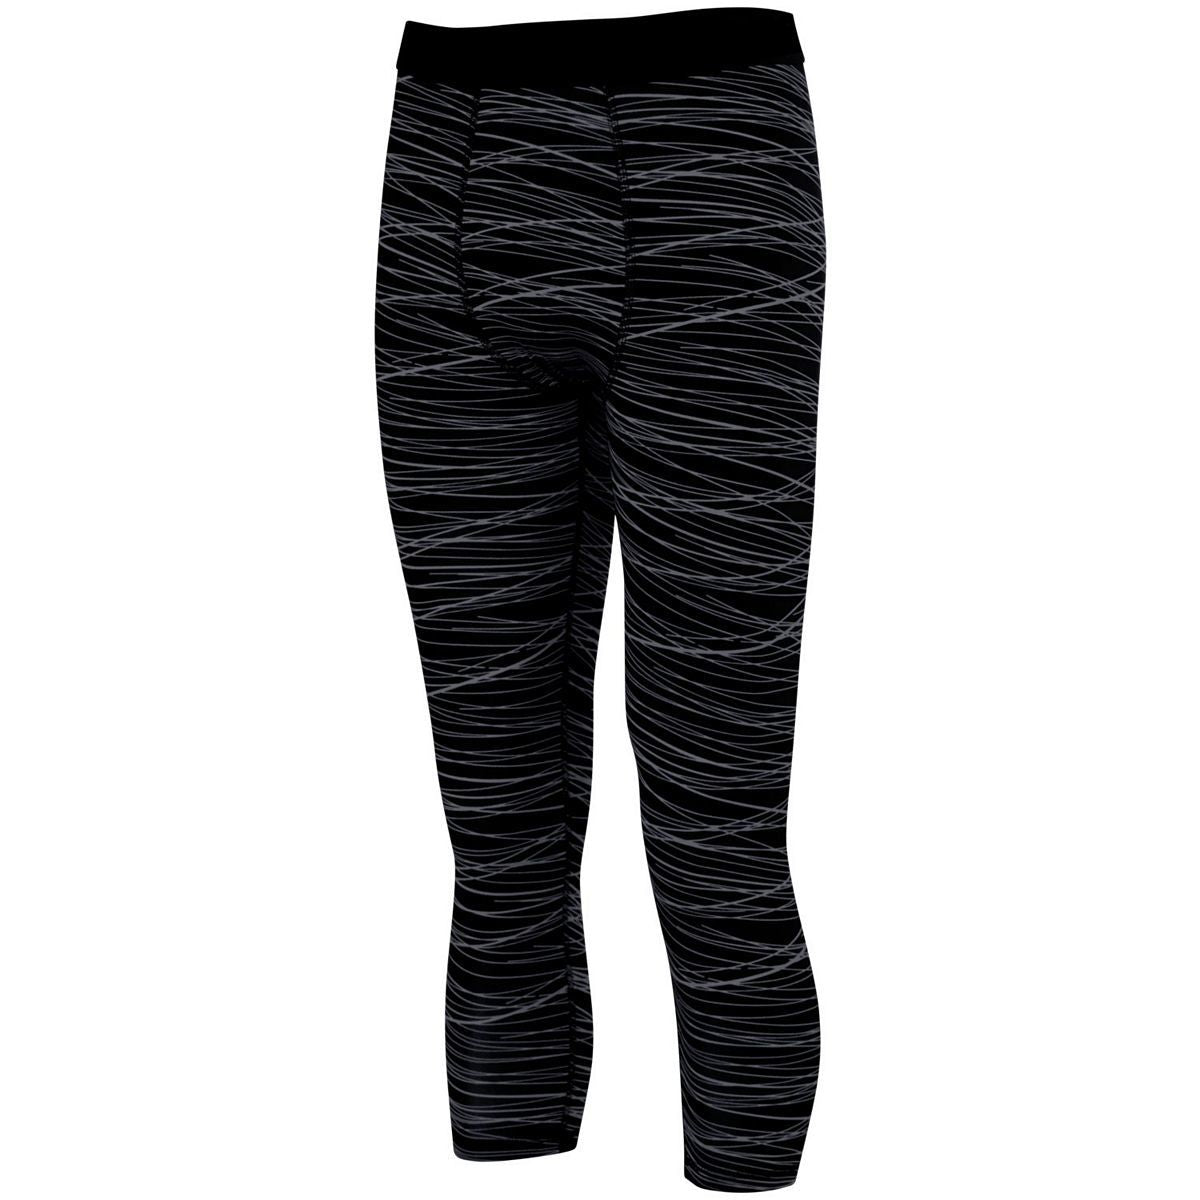 Augusta Sportswear Hyperform Compression Calf-Length Tight in Black/Graphite Print  -Part of the Adult, Augusta-Products product lines at KanaleyCreations.com